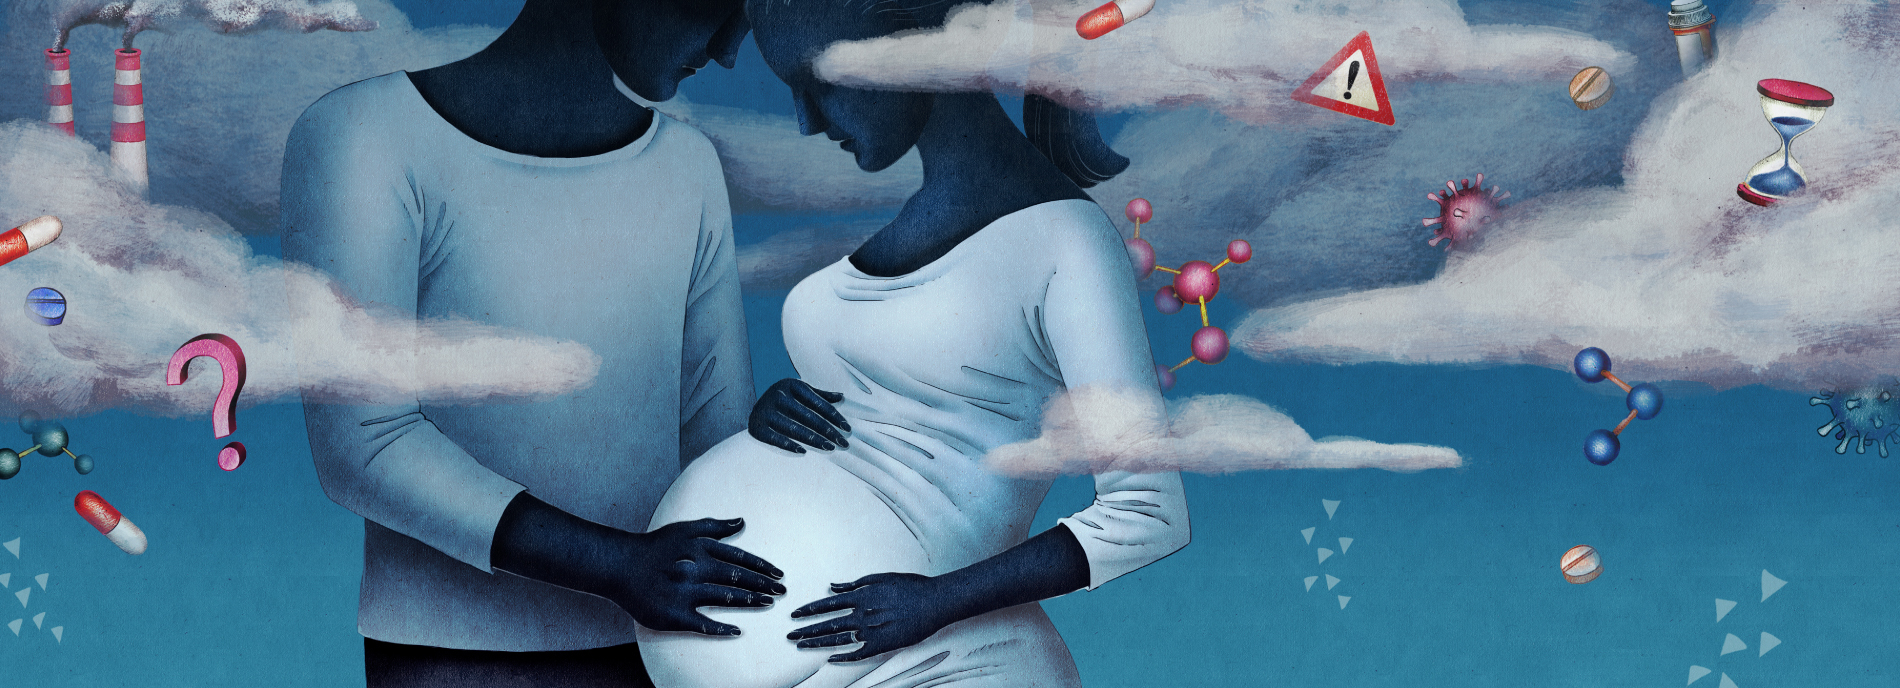 A mother holds her pregnant belly with her partner, in the background there are warning signs and pollutants suggesting environmental dangers.